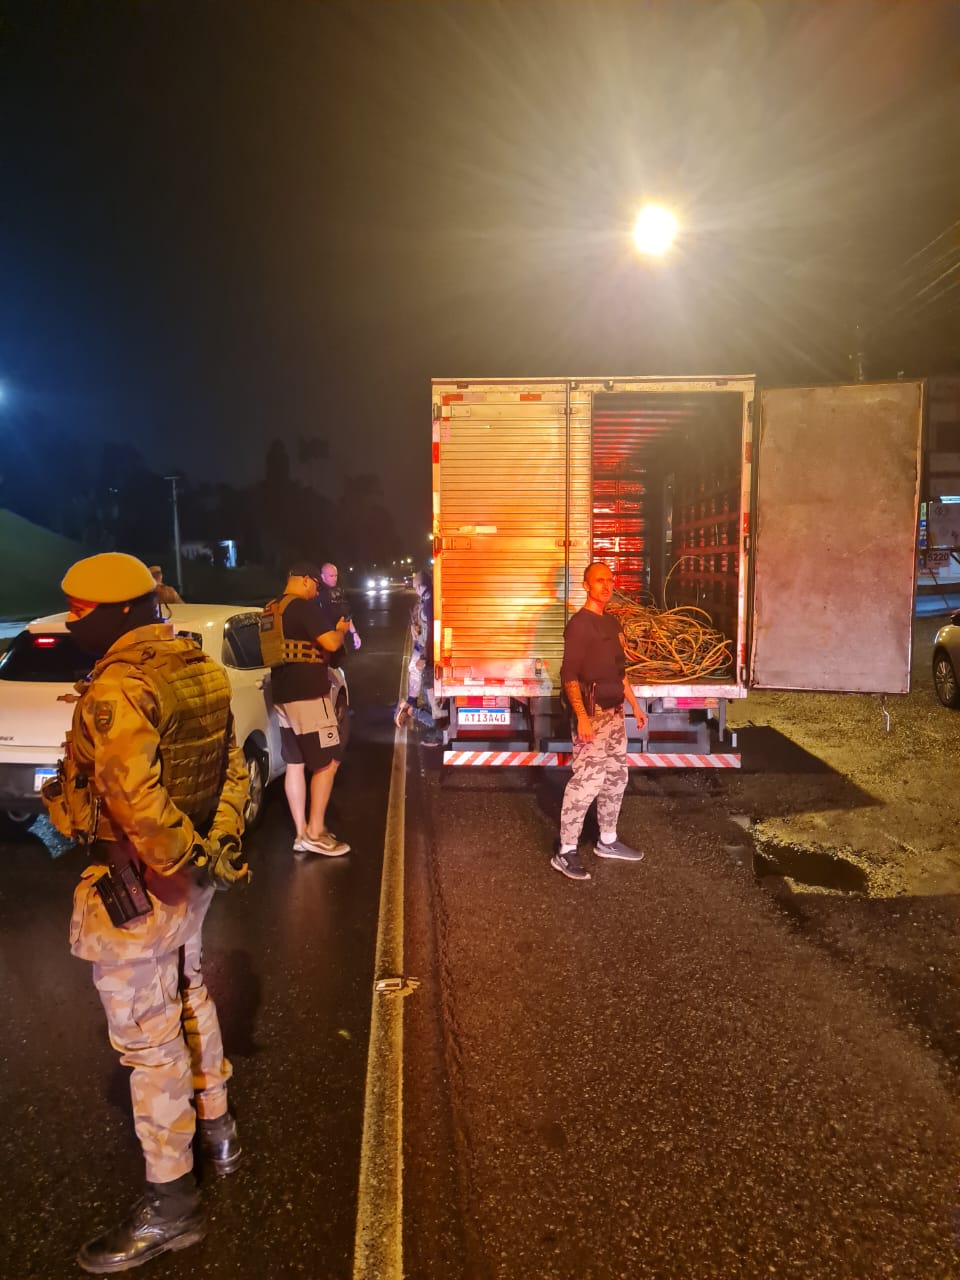 The criminals are arrested and the police recover stolen cargo worth R$400,000 in Blumenau - Disclosure/Reproduction/ND